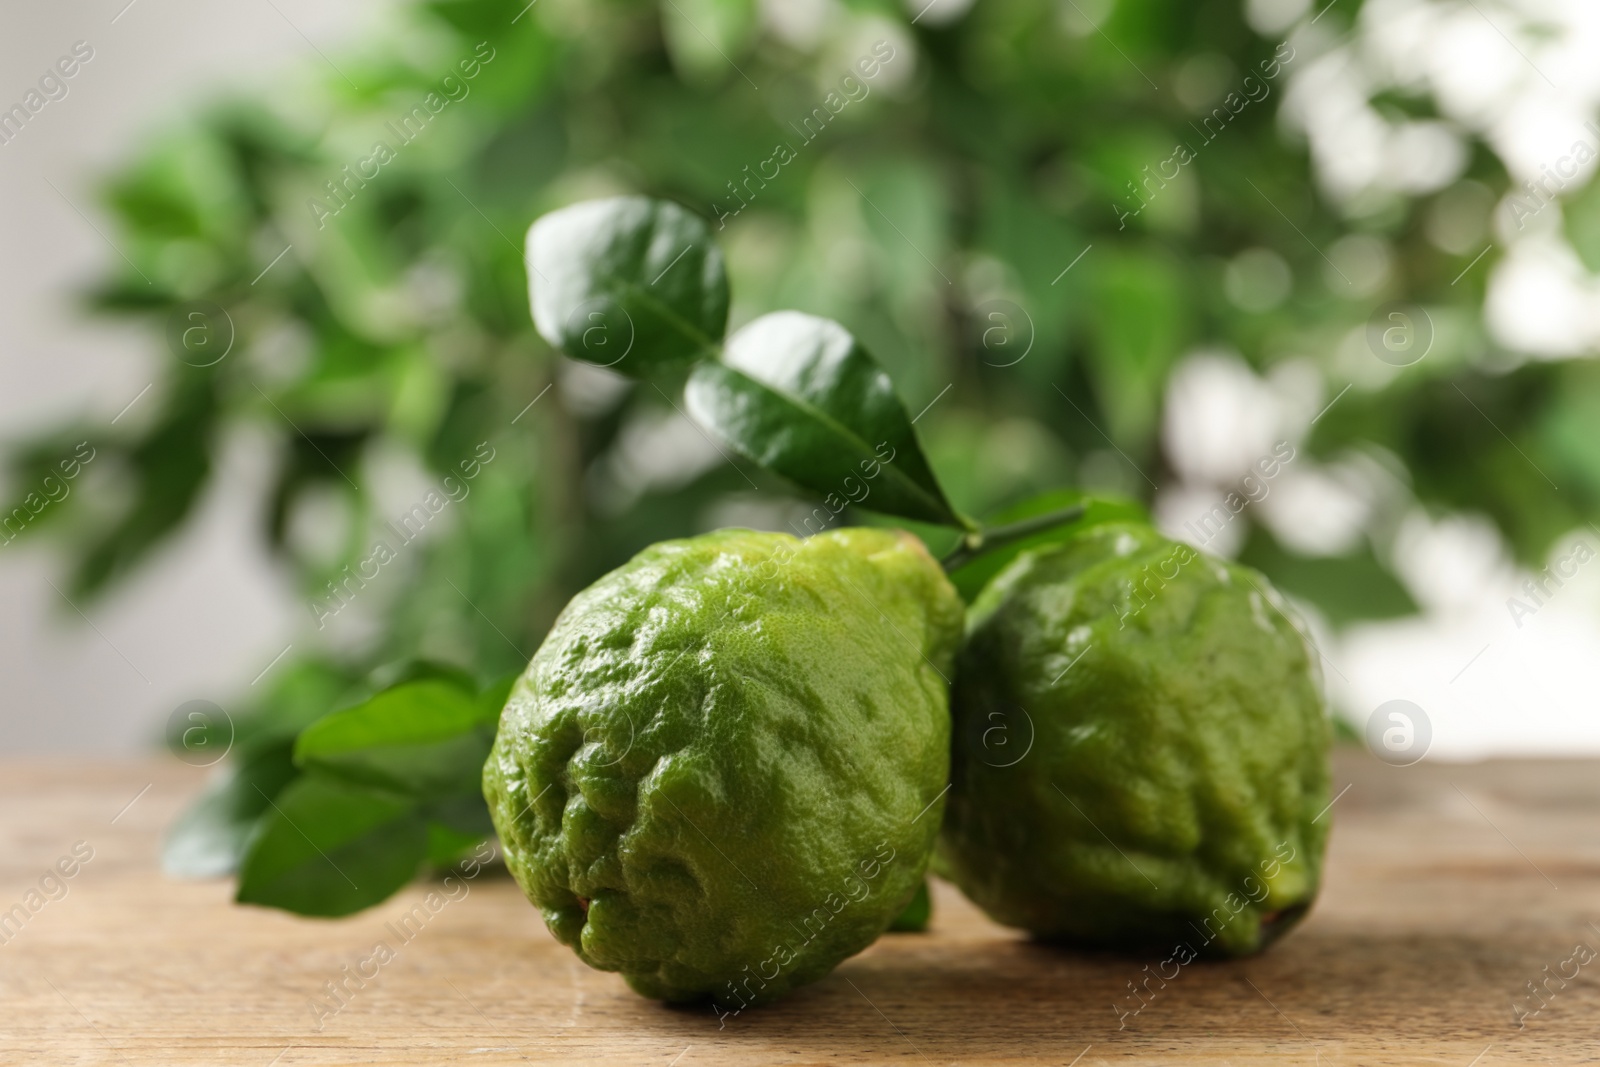 Photo of Fresh ripe bergamot fruits with green leaves on wooden table against blurred background